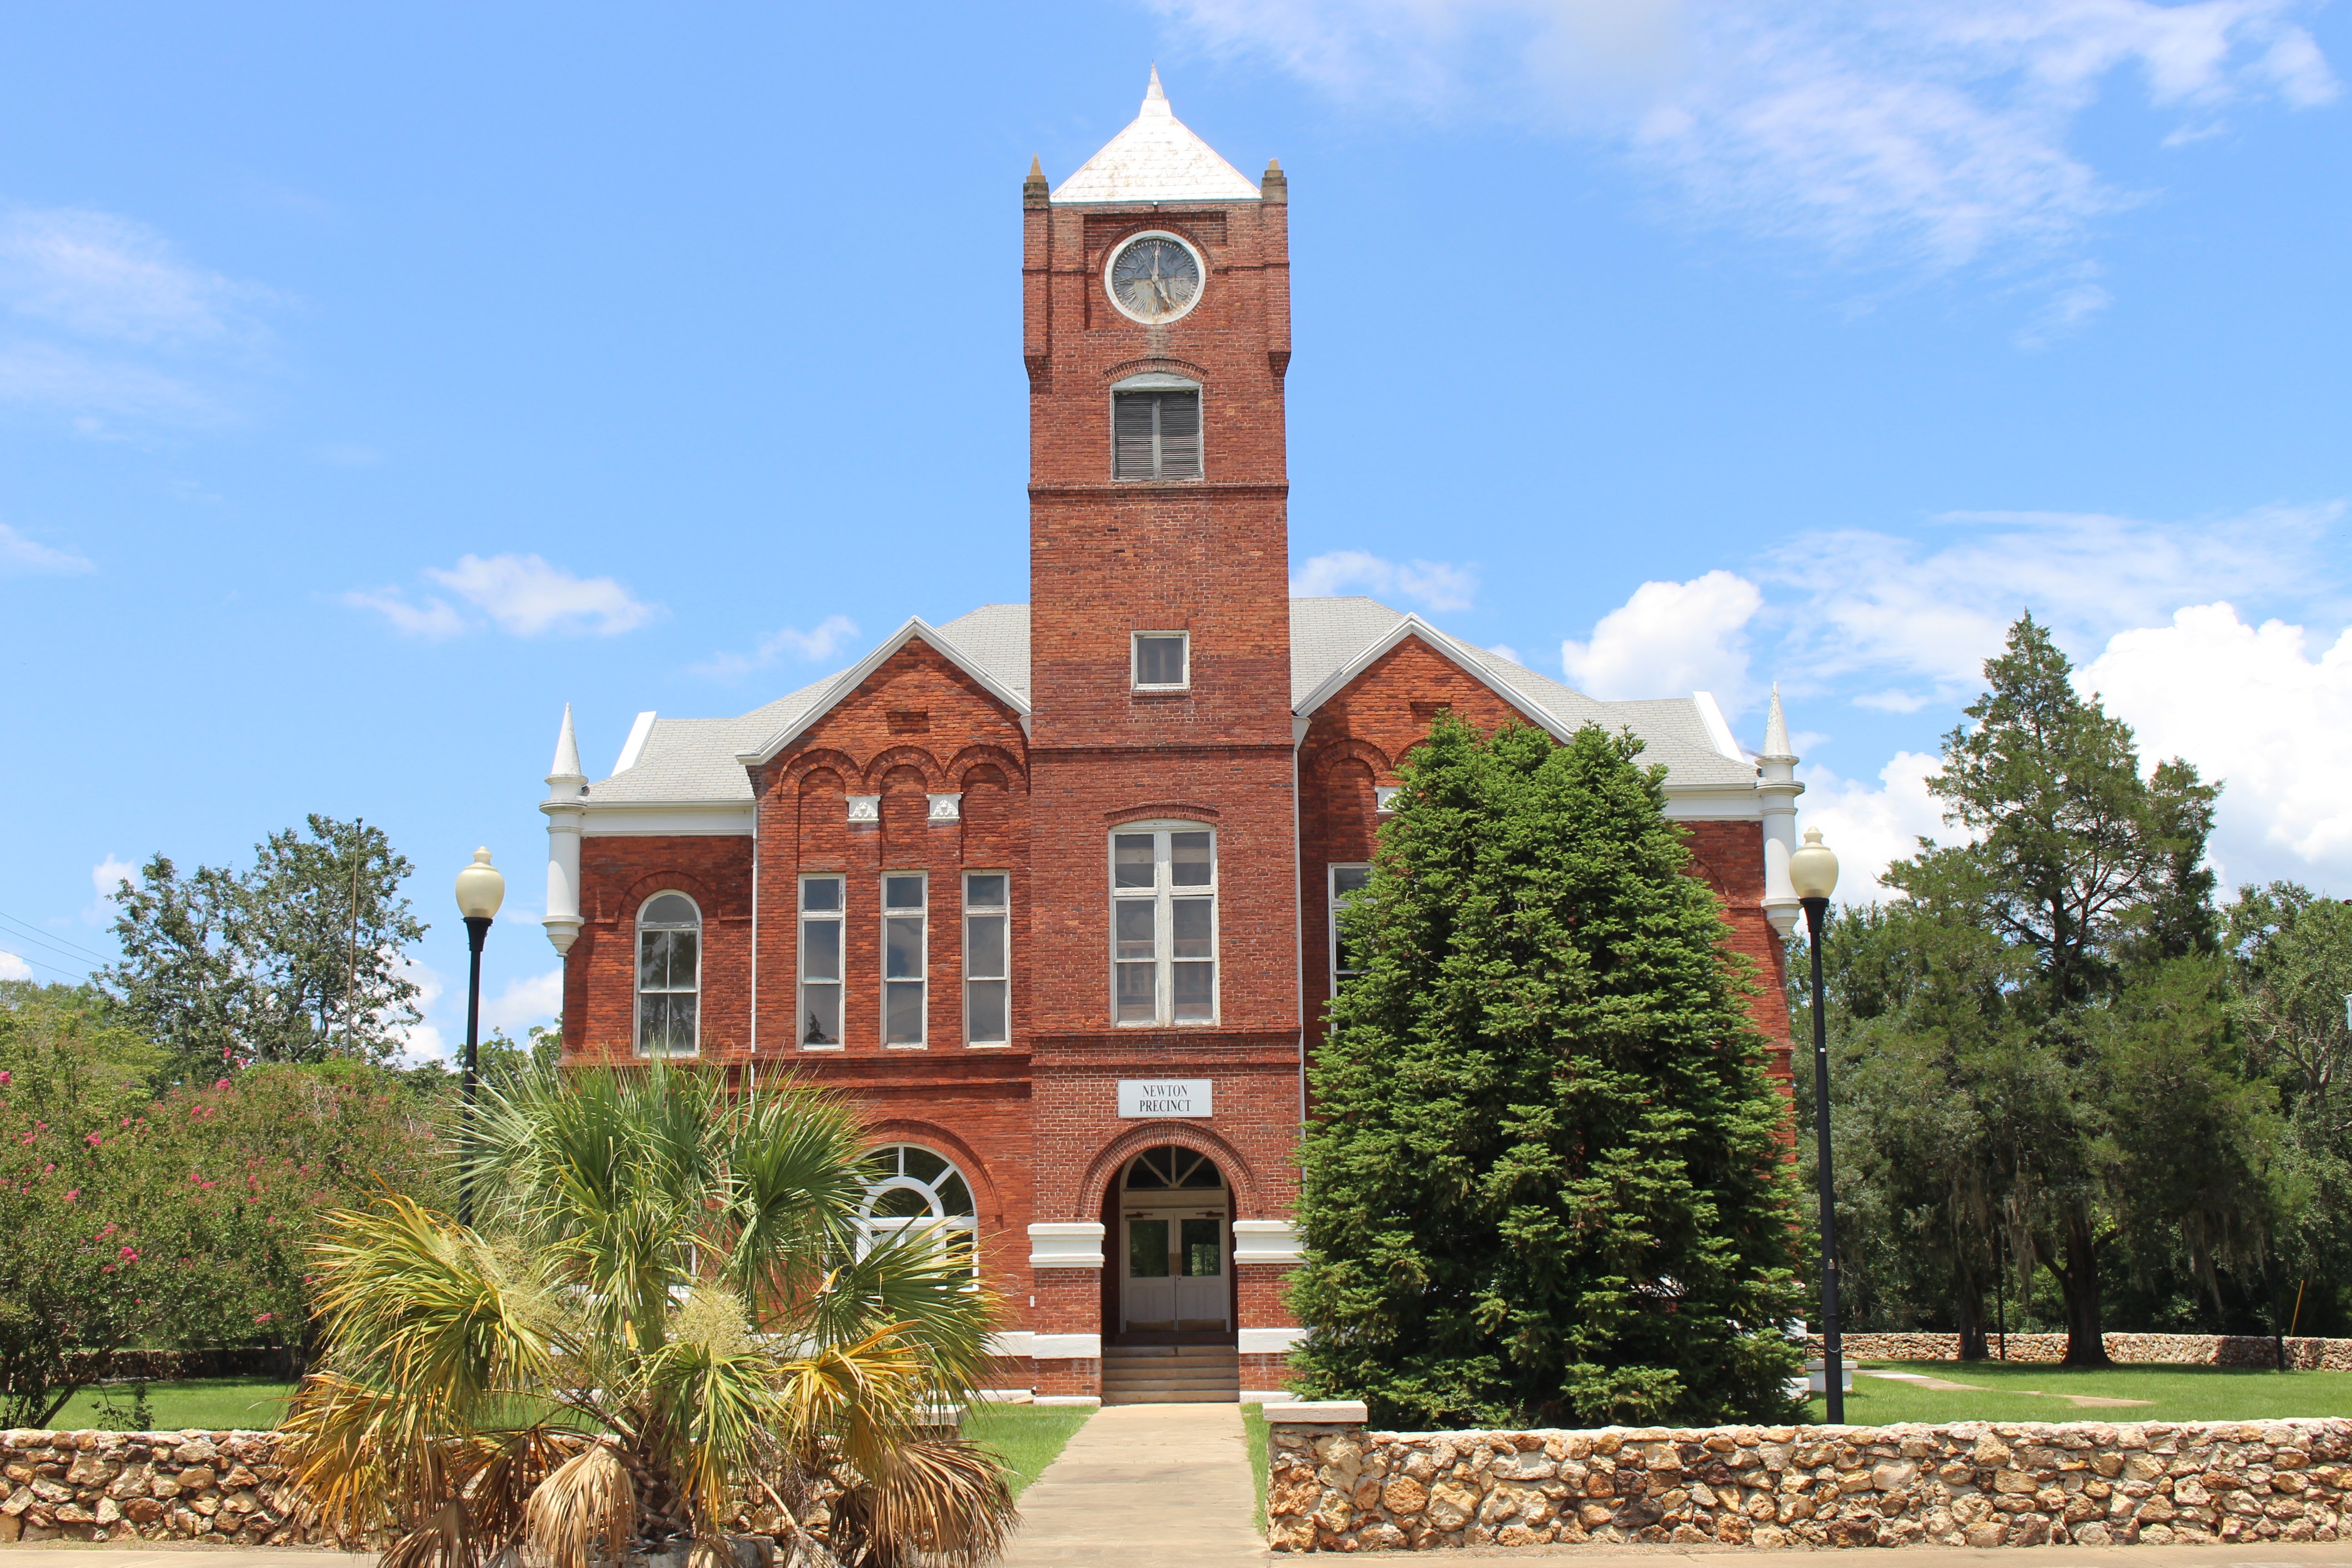 Baker County Courthouse, Newton 1900 by Michael Rivera